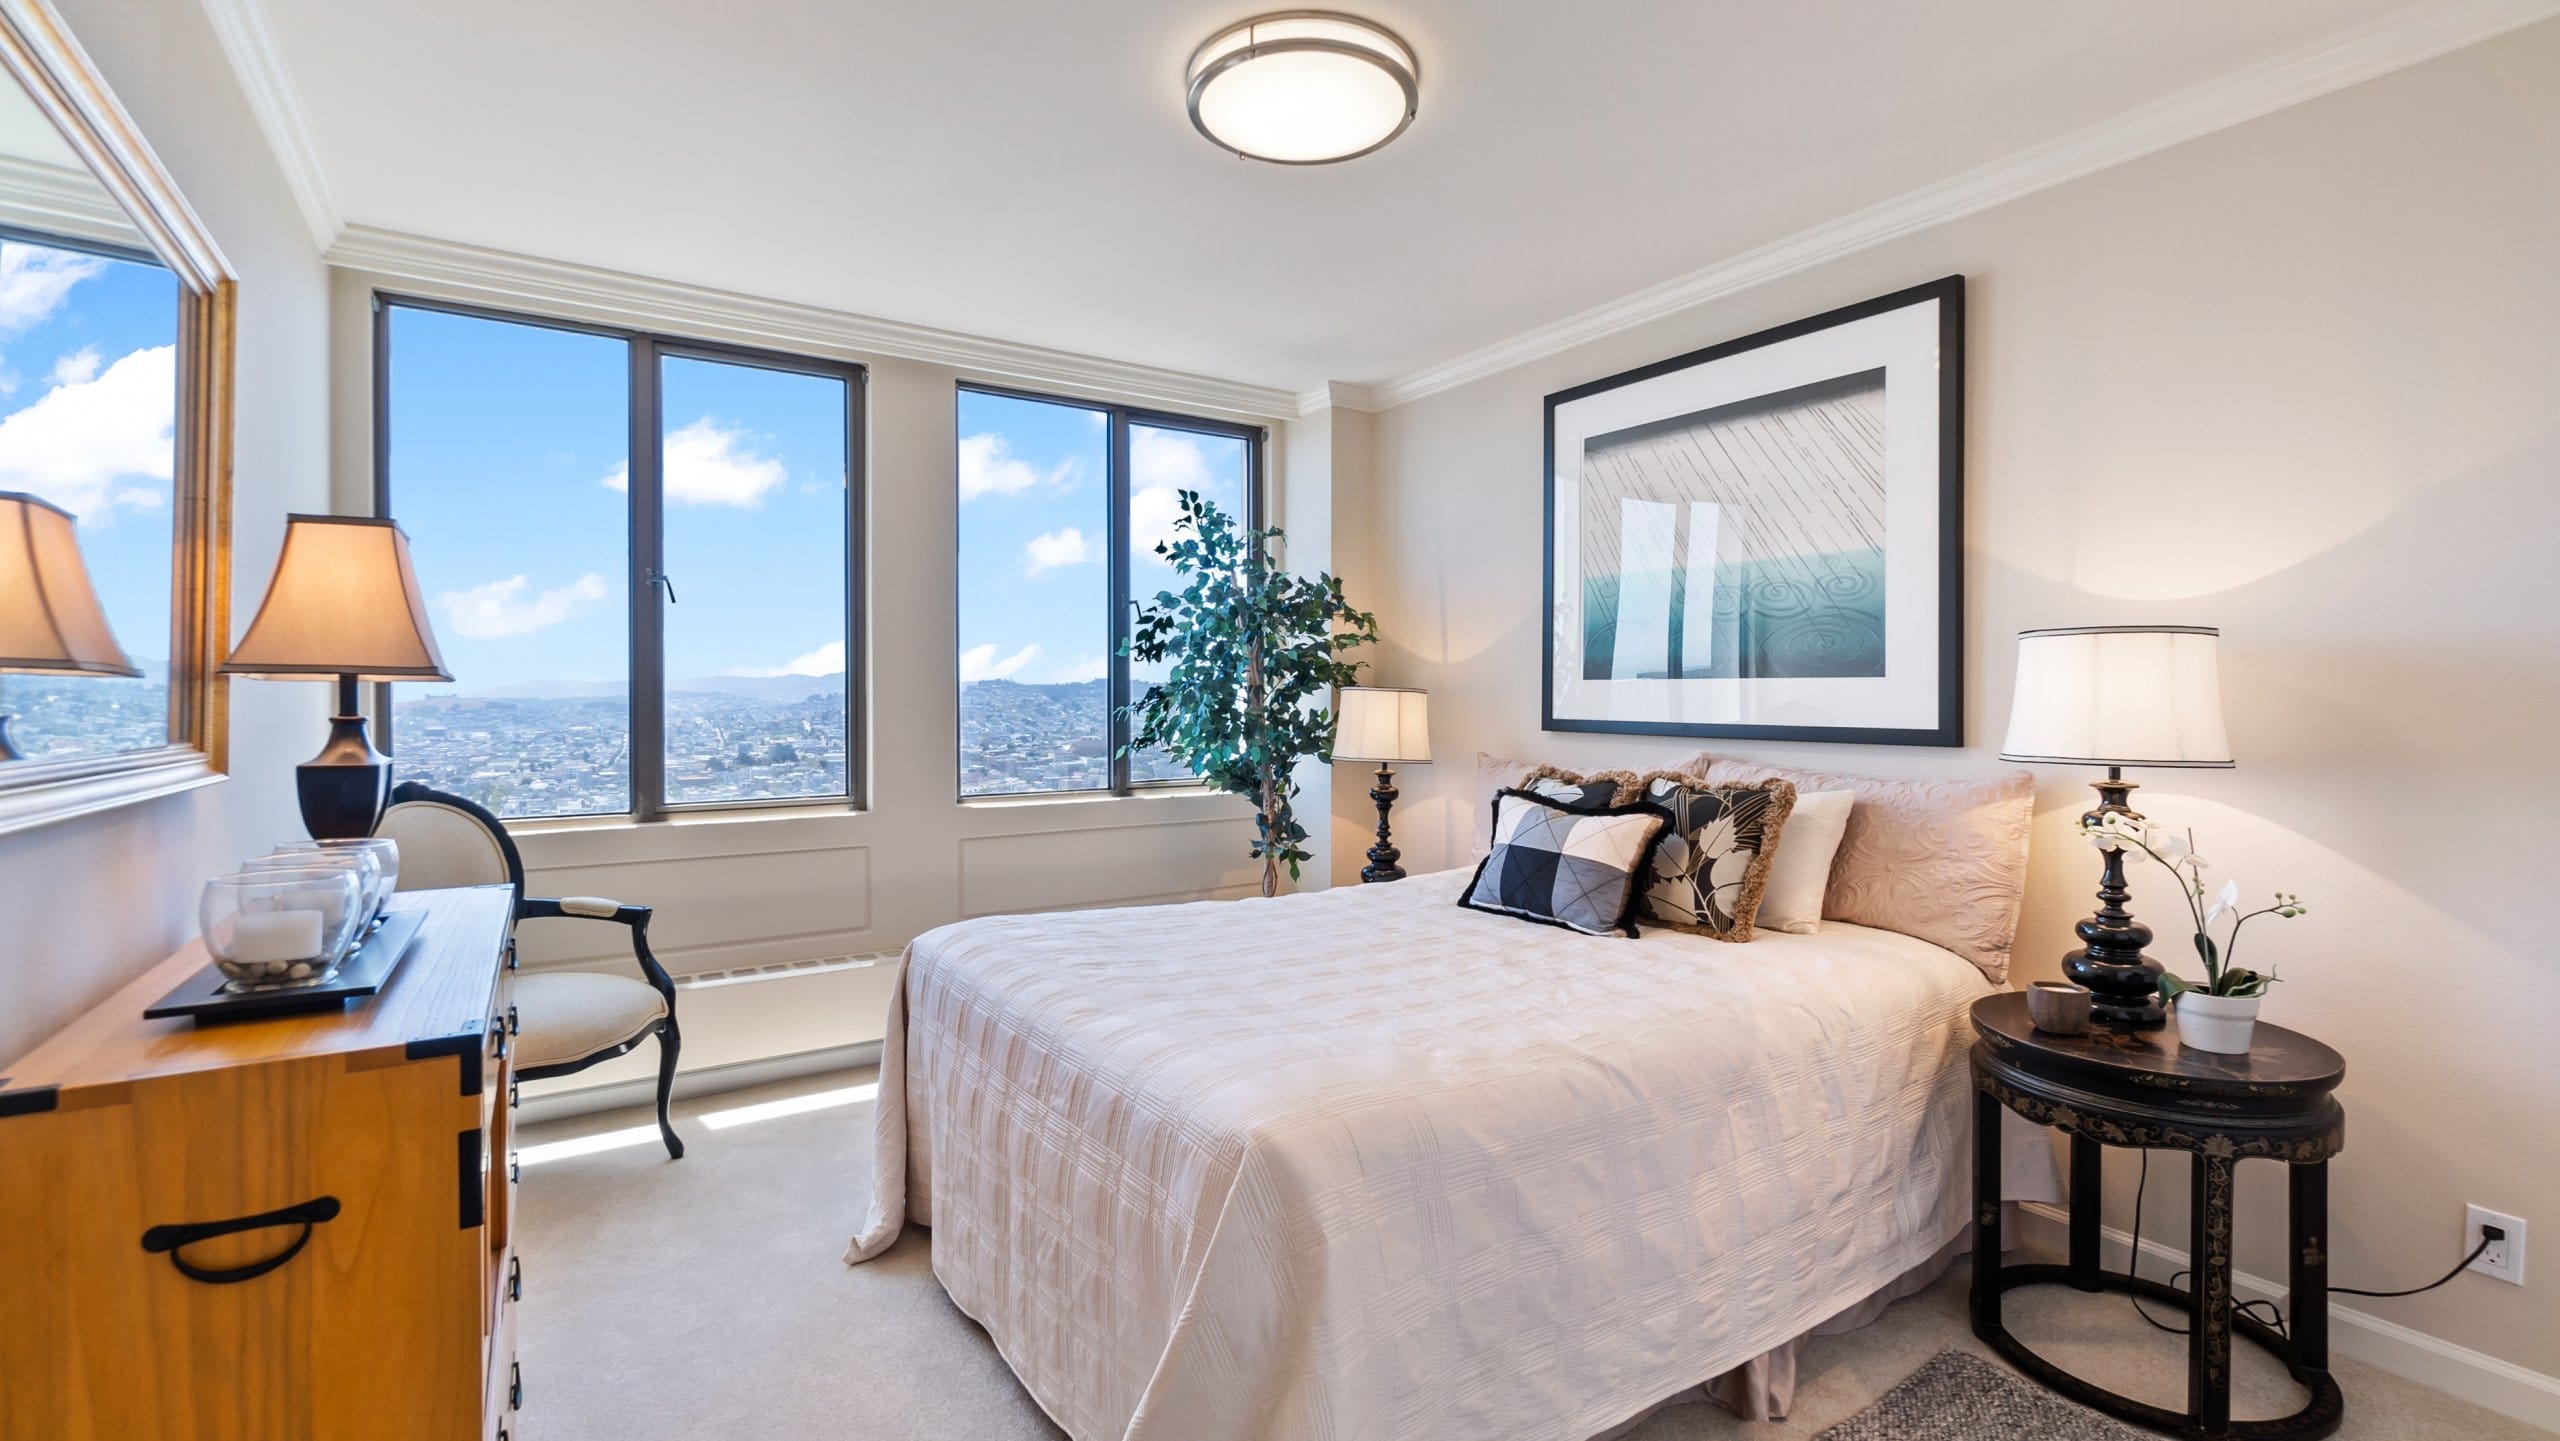 Interior photo of a furnished bedroom at the San Francisco Sequoia with a view of the city